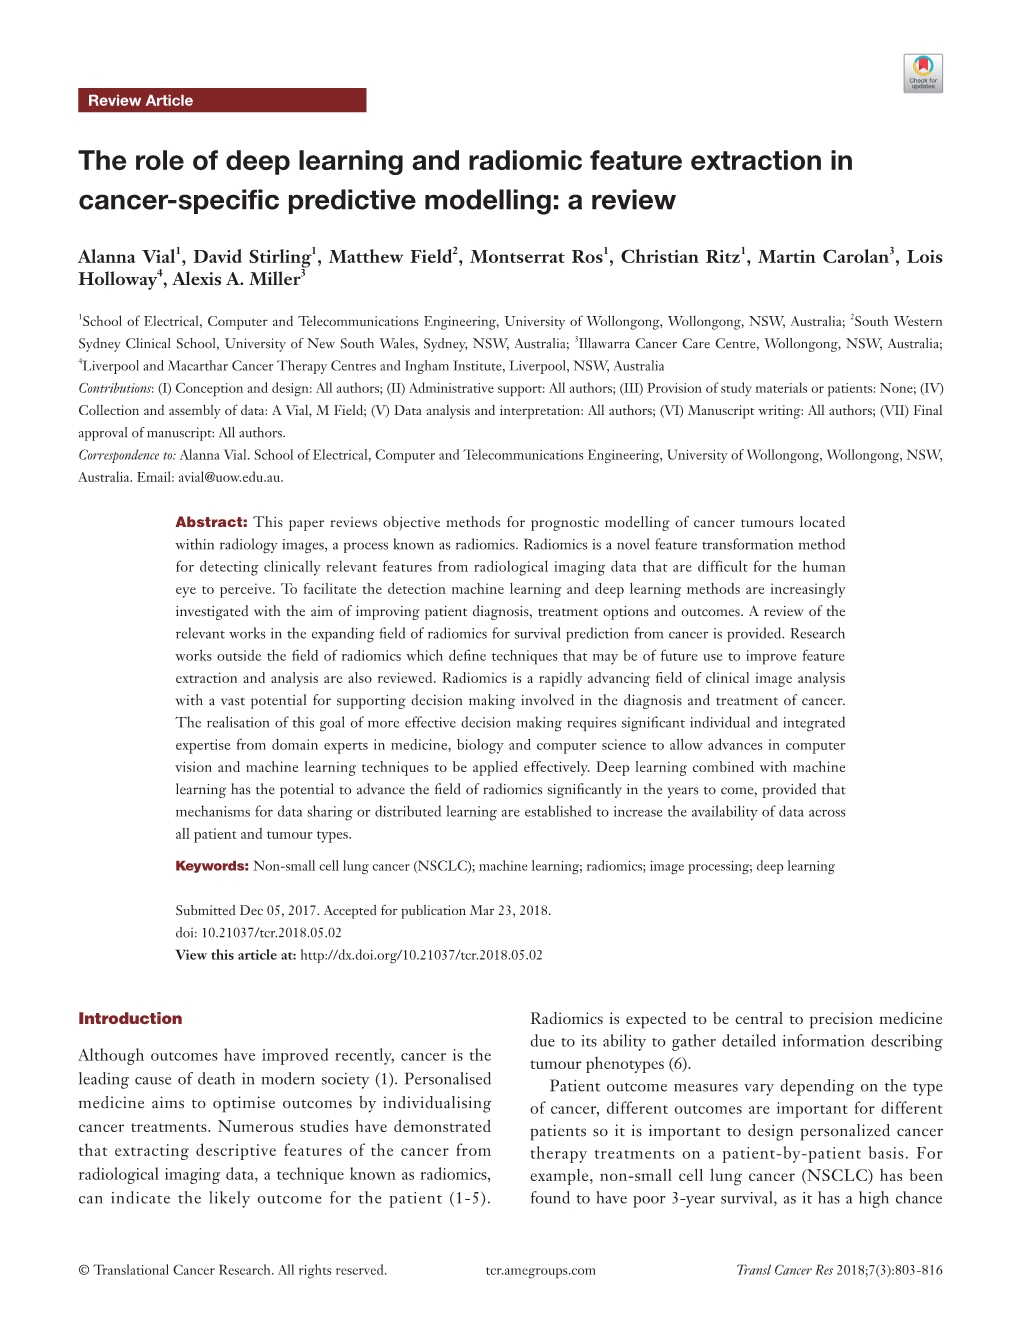 The Role of Deep Learning and Radiomic Feature Extraction in Cancer-Specific Predictive Modelling: a Review